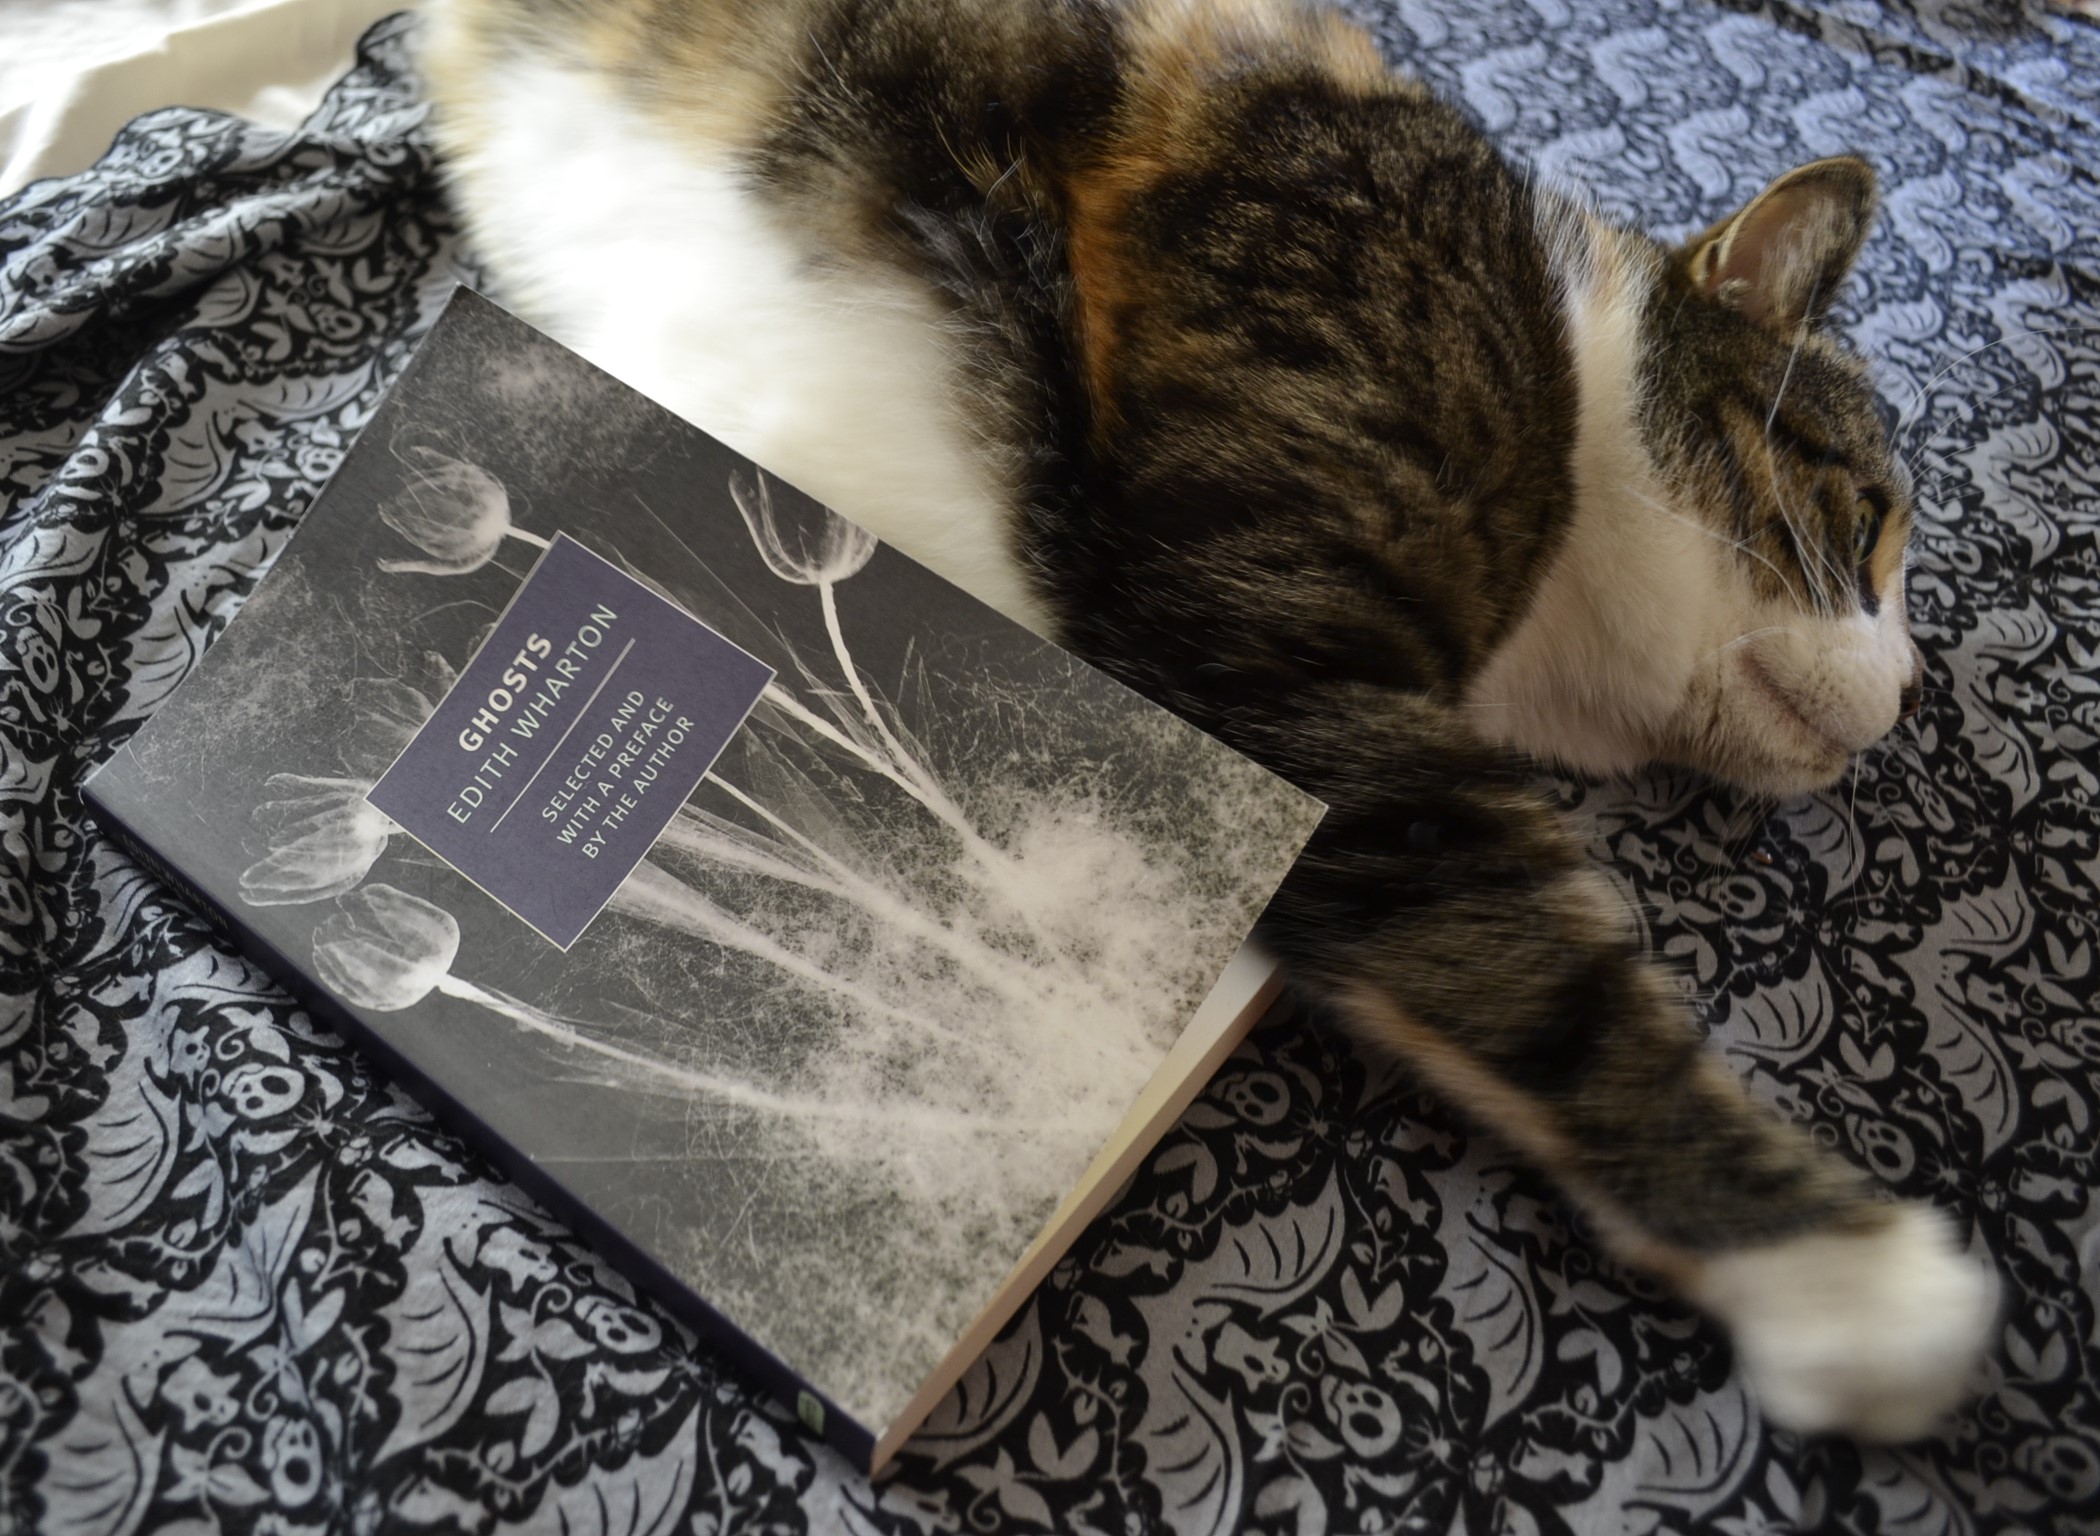 A calico tabby stretches out beside a book: Ghosts by Edith Wharton.